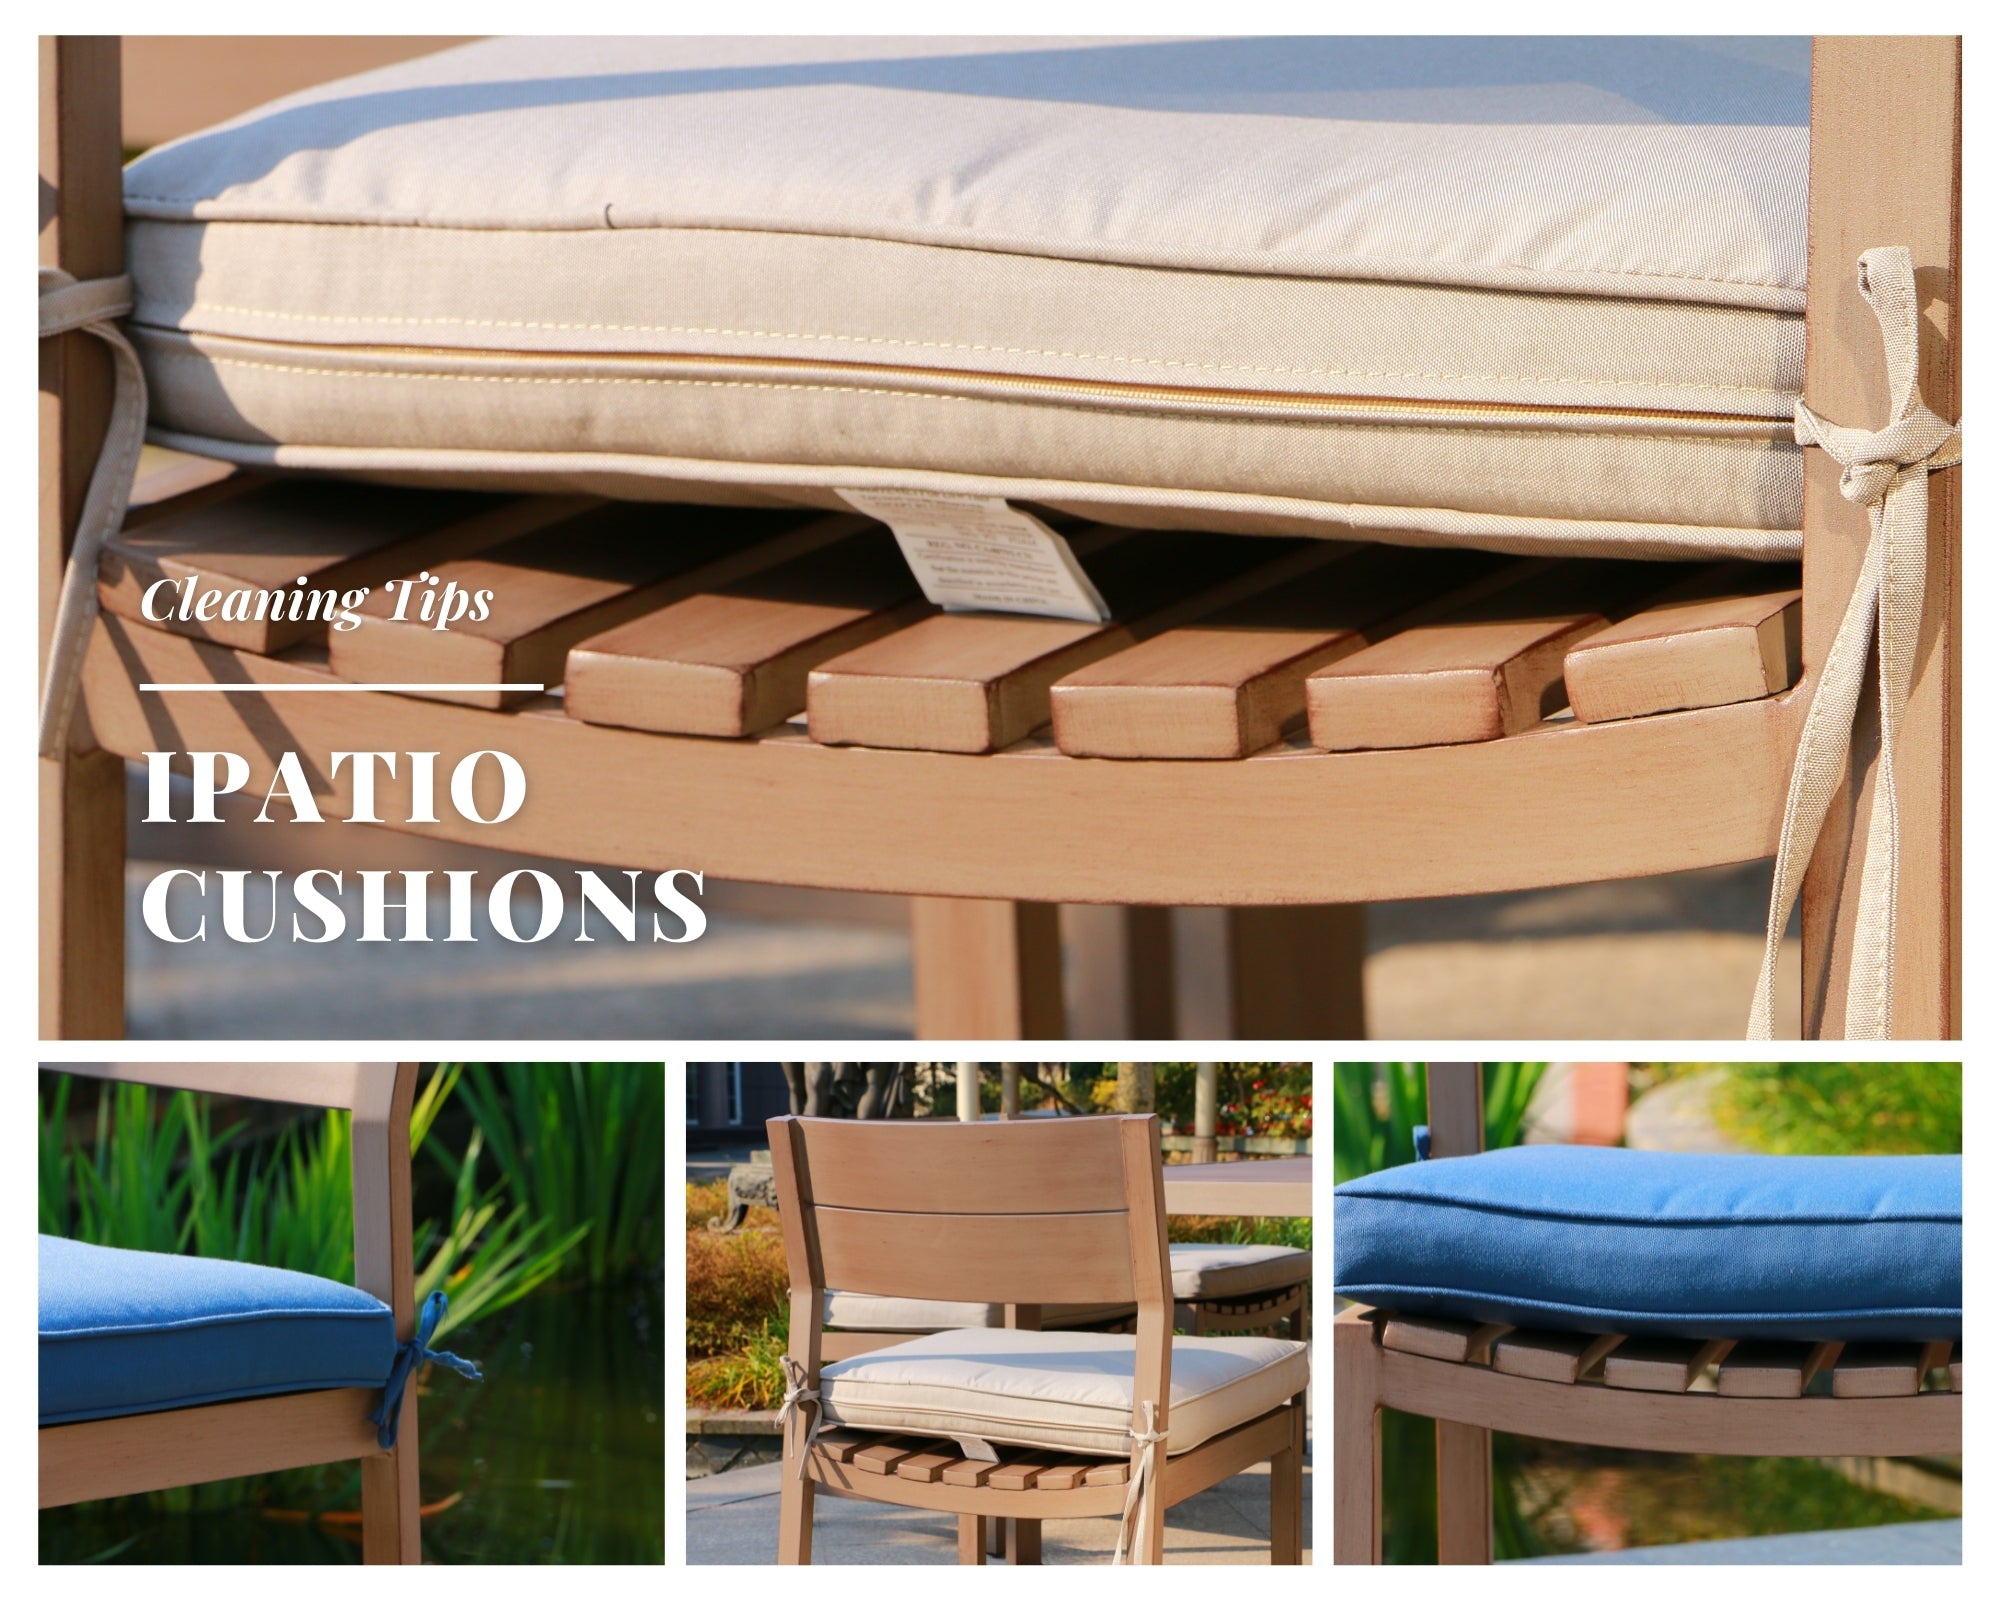 Cleaning Tips for your iPatio Cushions